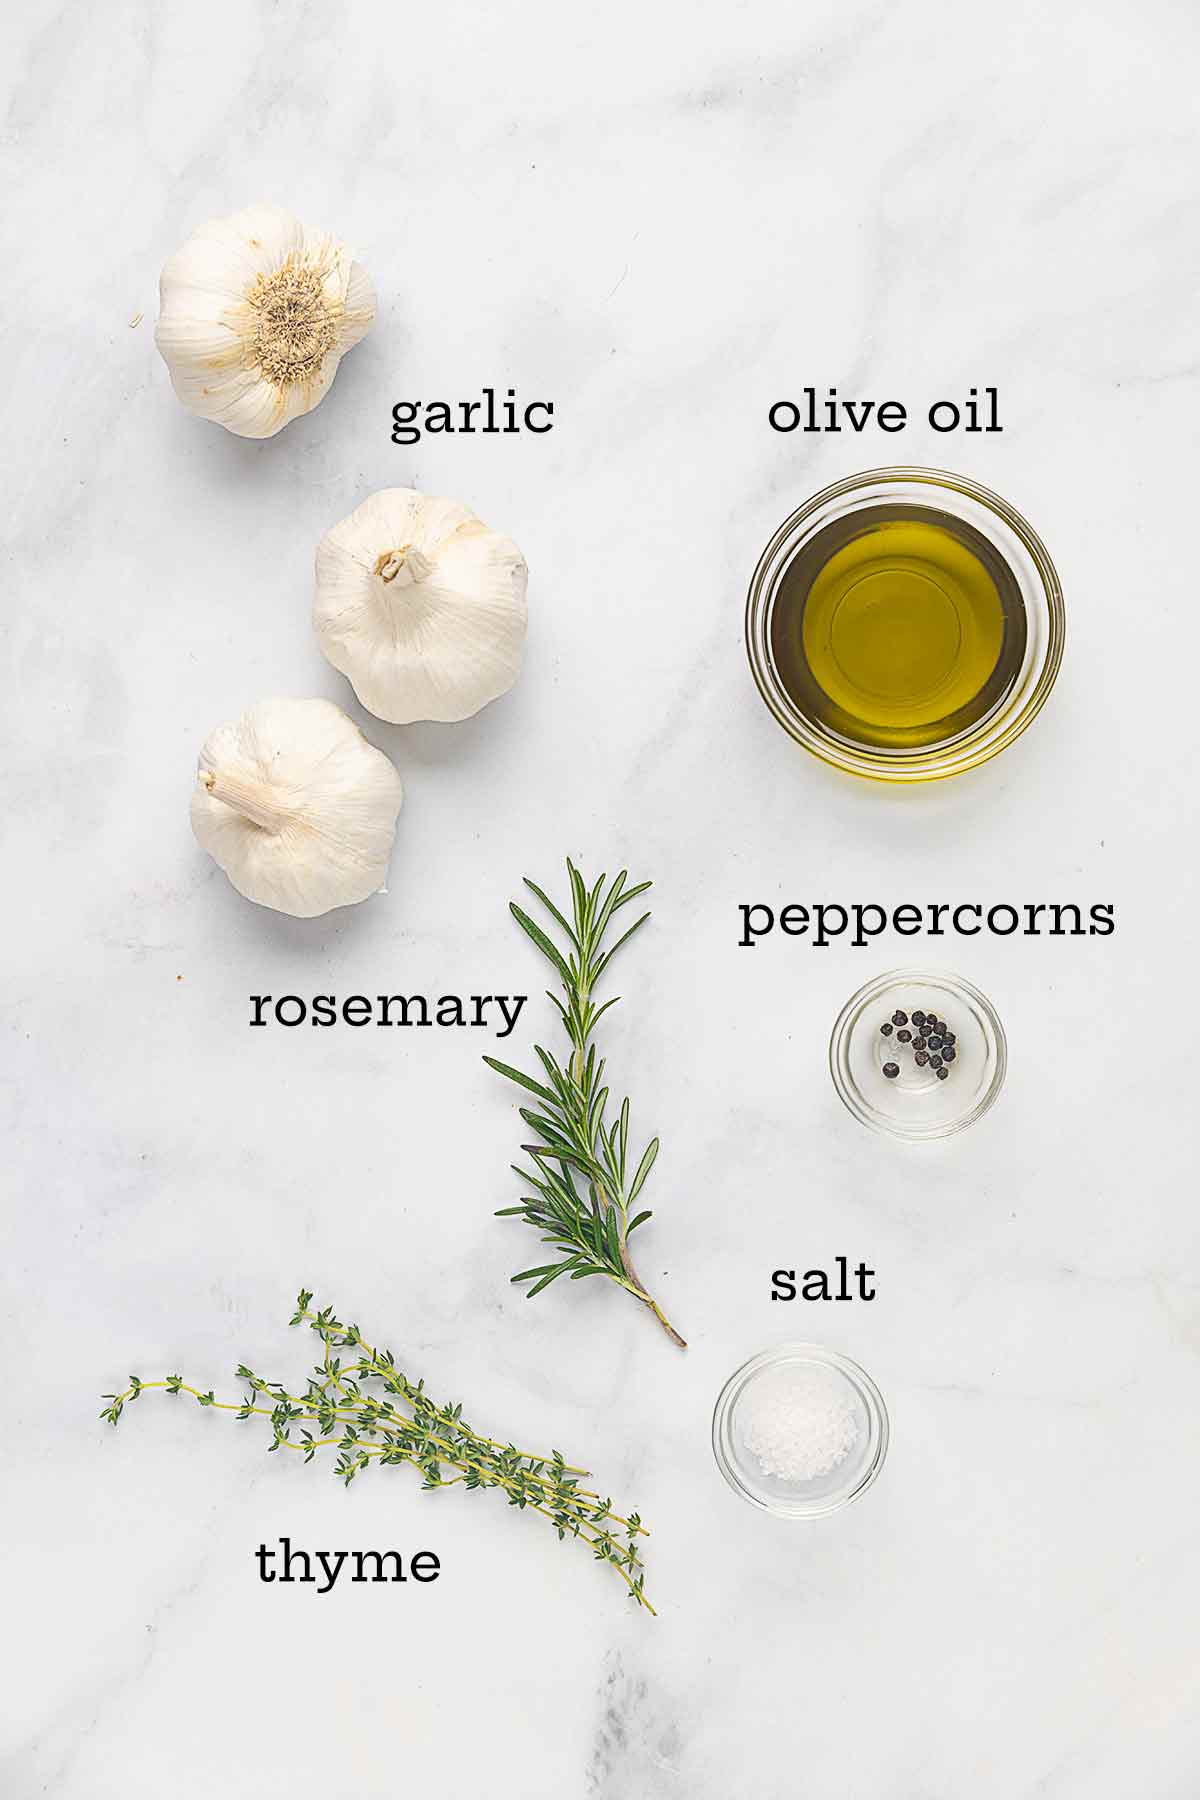 Ingredients for garlic confit--garlic, oil, rosemary, thyme, salt, and peppercorns.